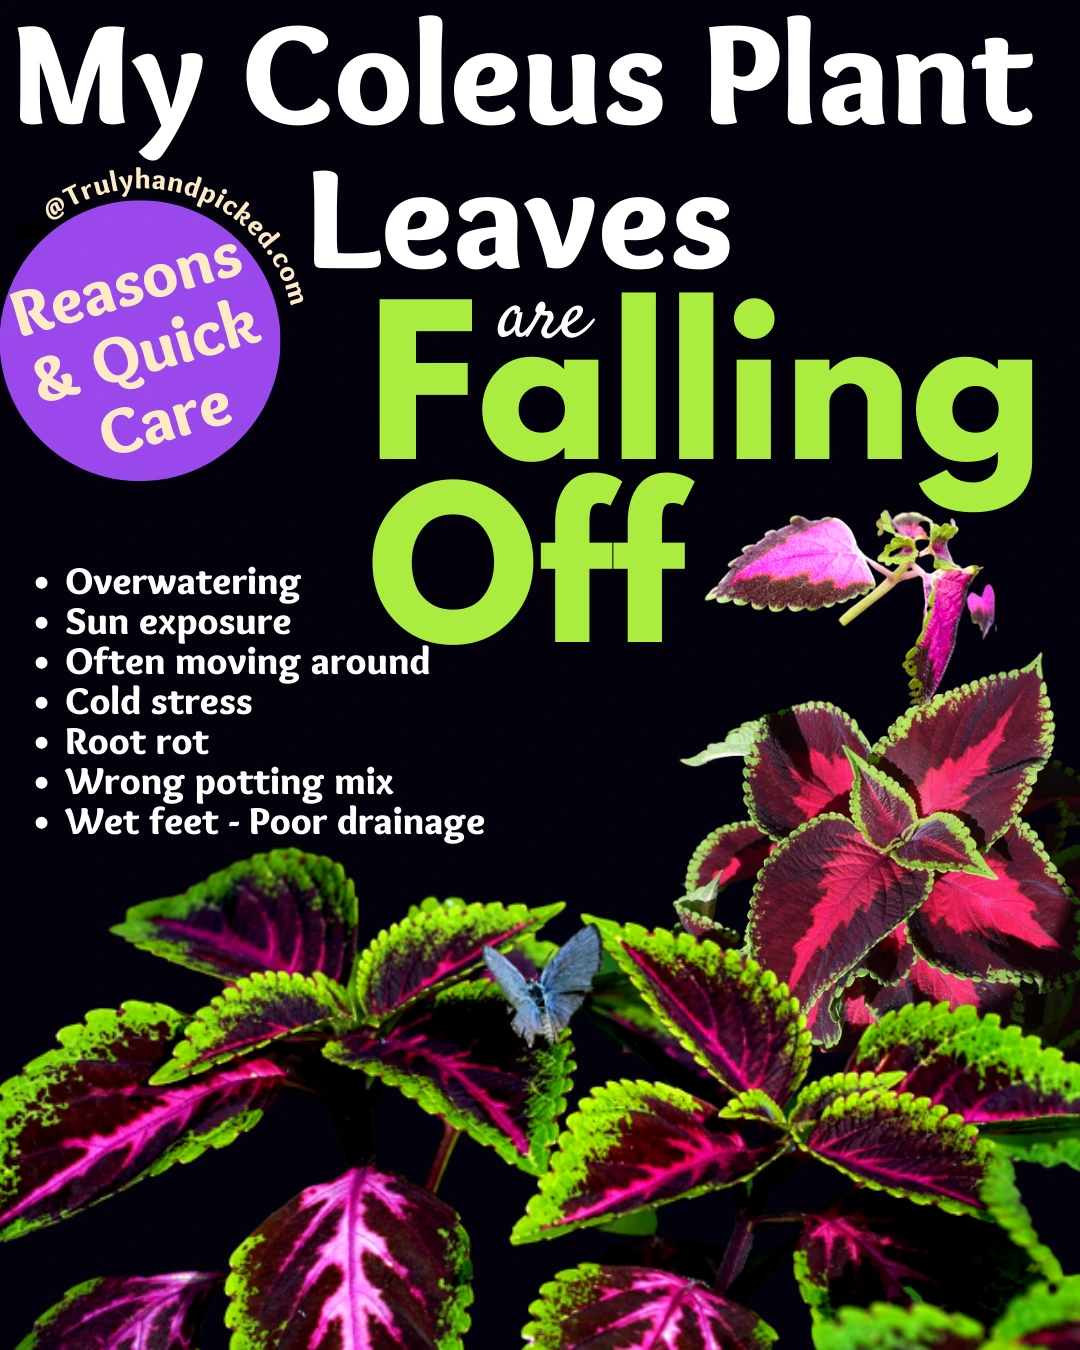 Why my coleus plant leaves are falling off how to fix quick care tips